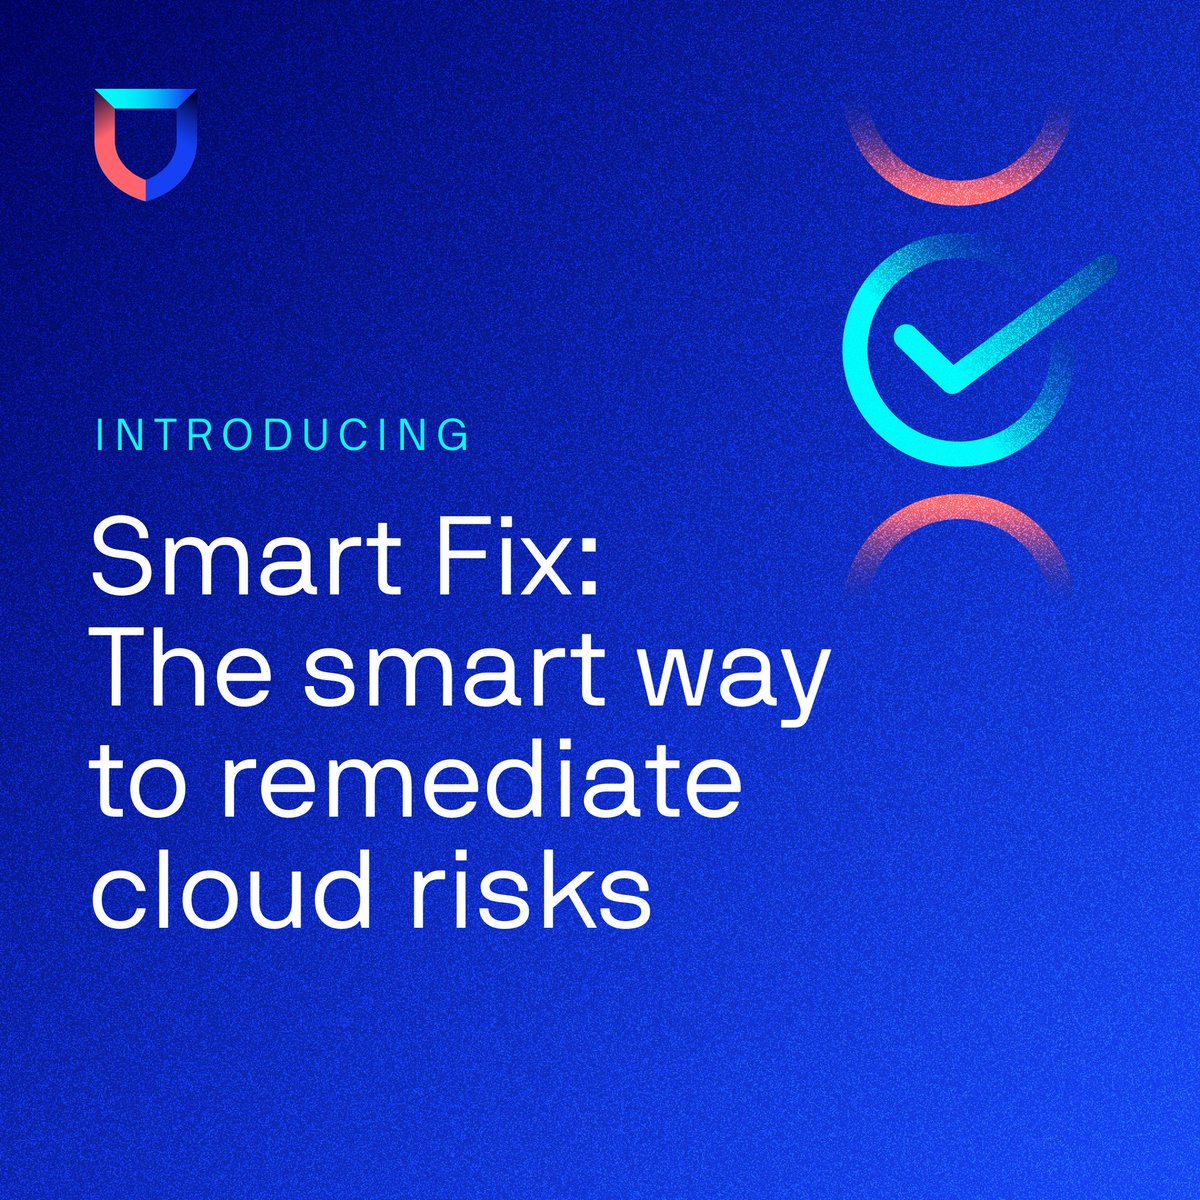 🛠️ Introducing Lacework Smart Fix, the smart way to remediate cloud risks💡 Smart Fix automatically finds the optimal upgrade to resolve #code vulnerabilities without adding new ones, so #developers can focus on building and innovating. Learn more: lacework.com/blog/introduci…